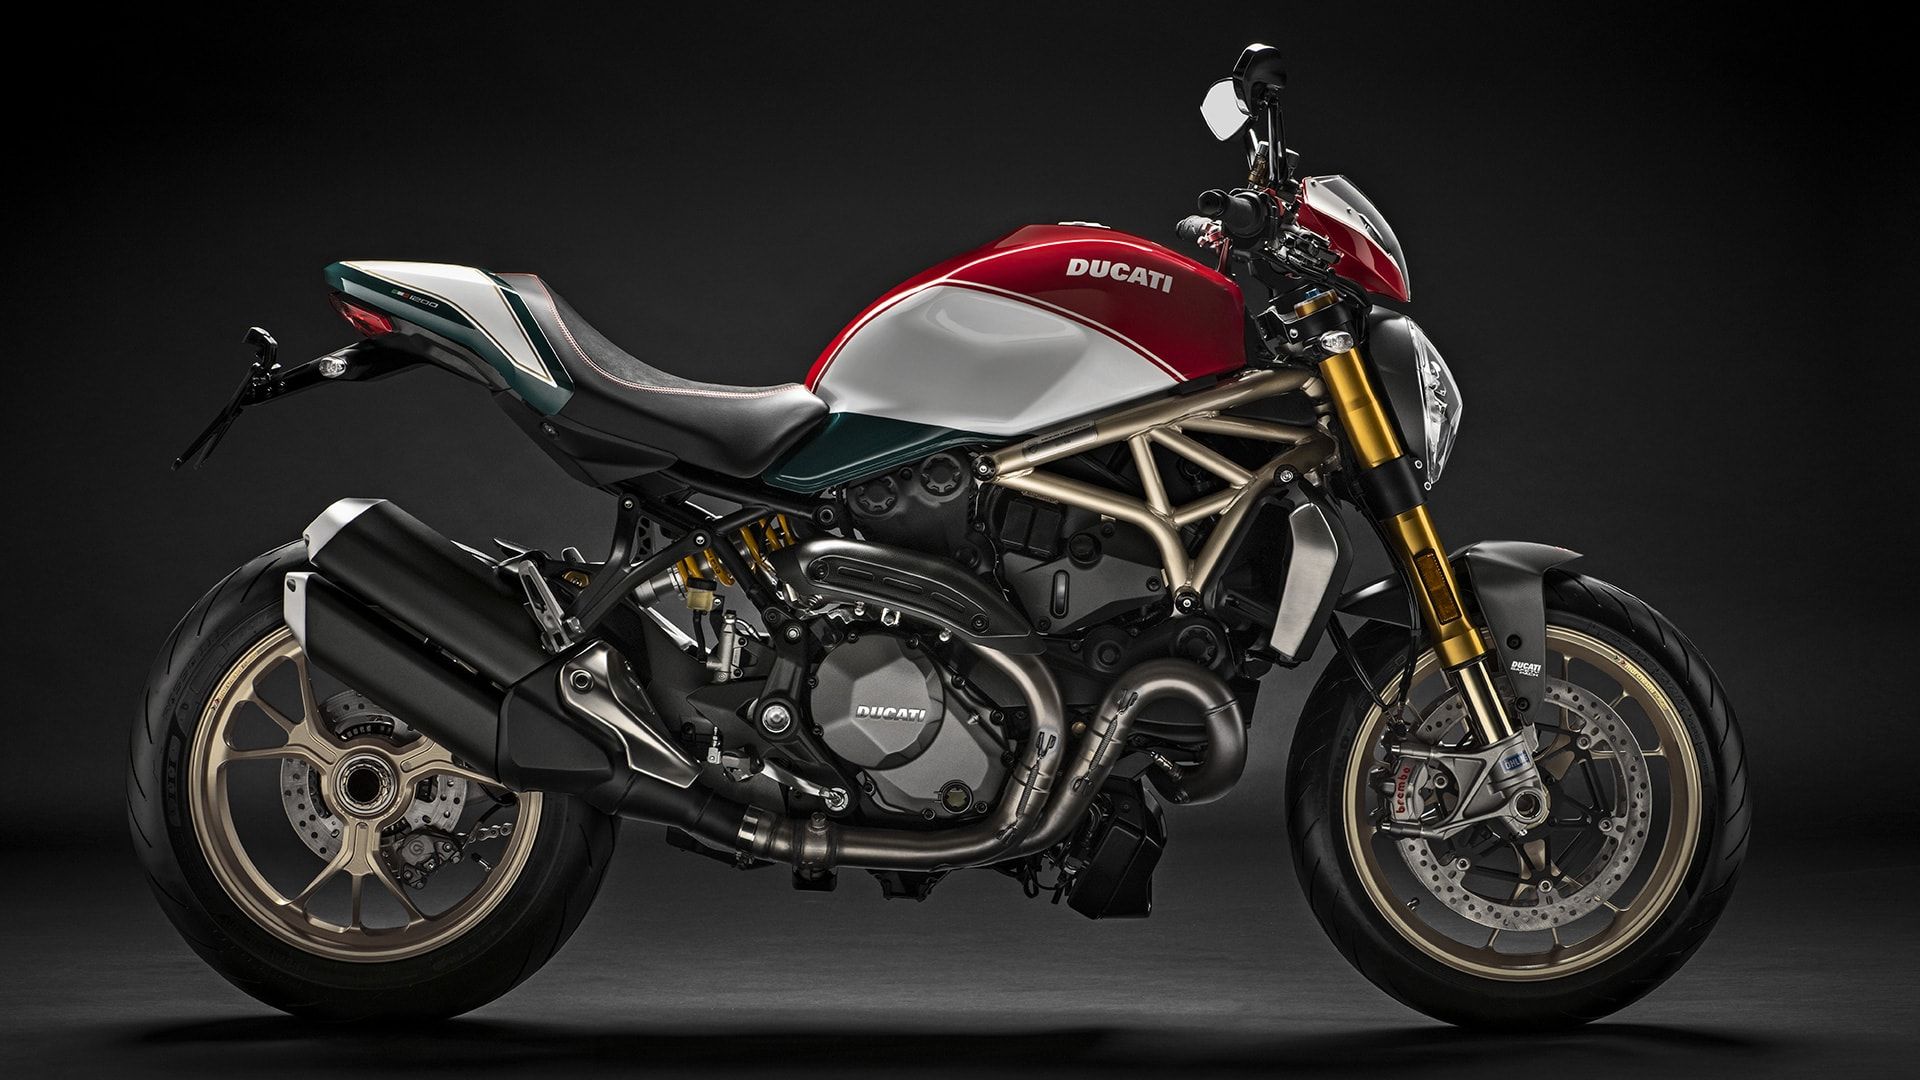 Ducati Celebrates Monster's 25th Anniversary with Limited-Edition Model